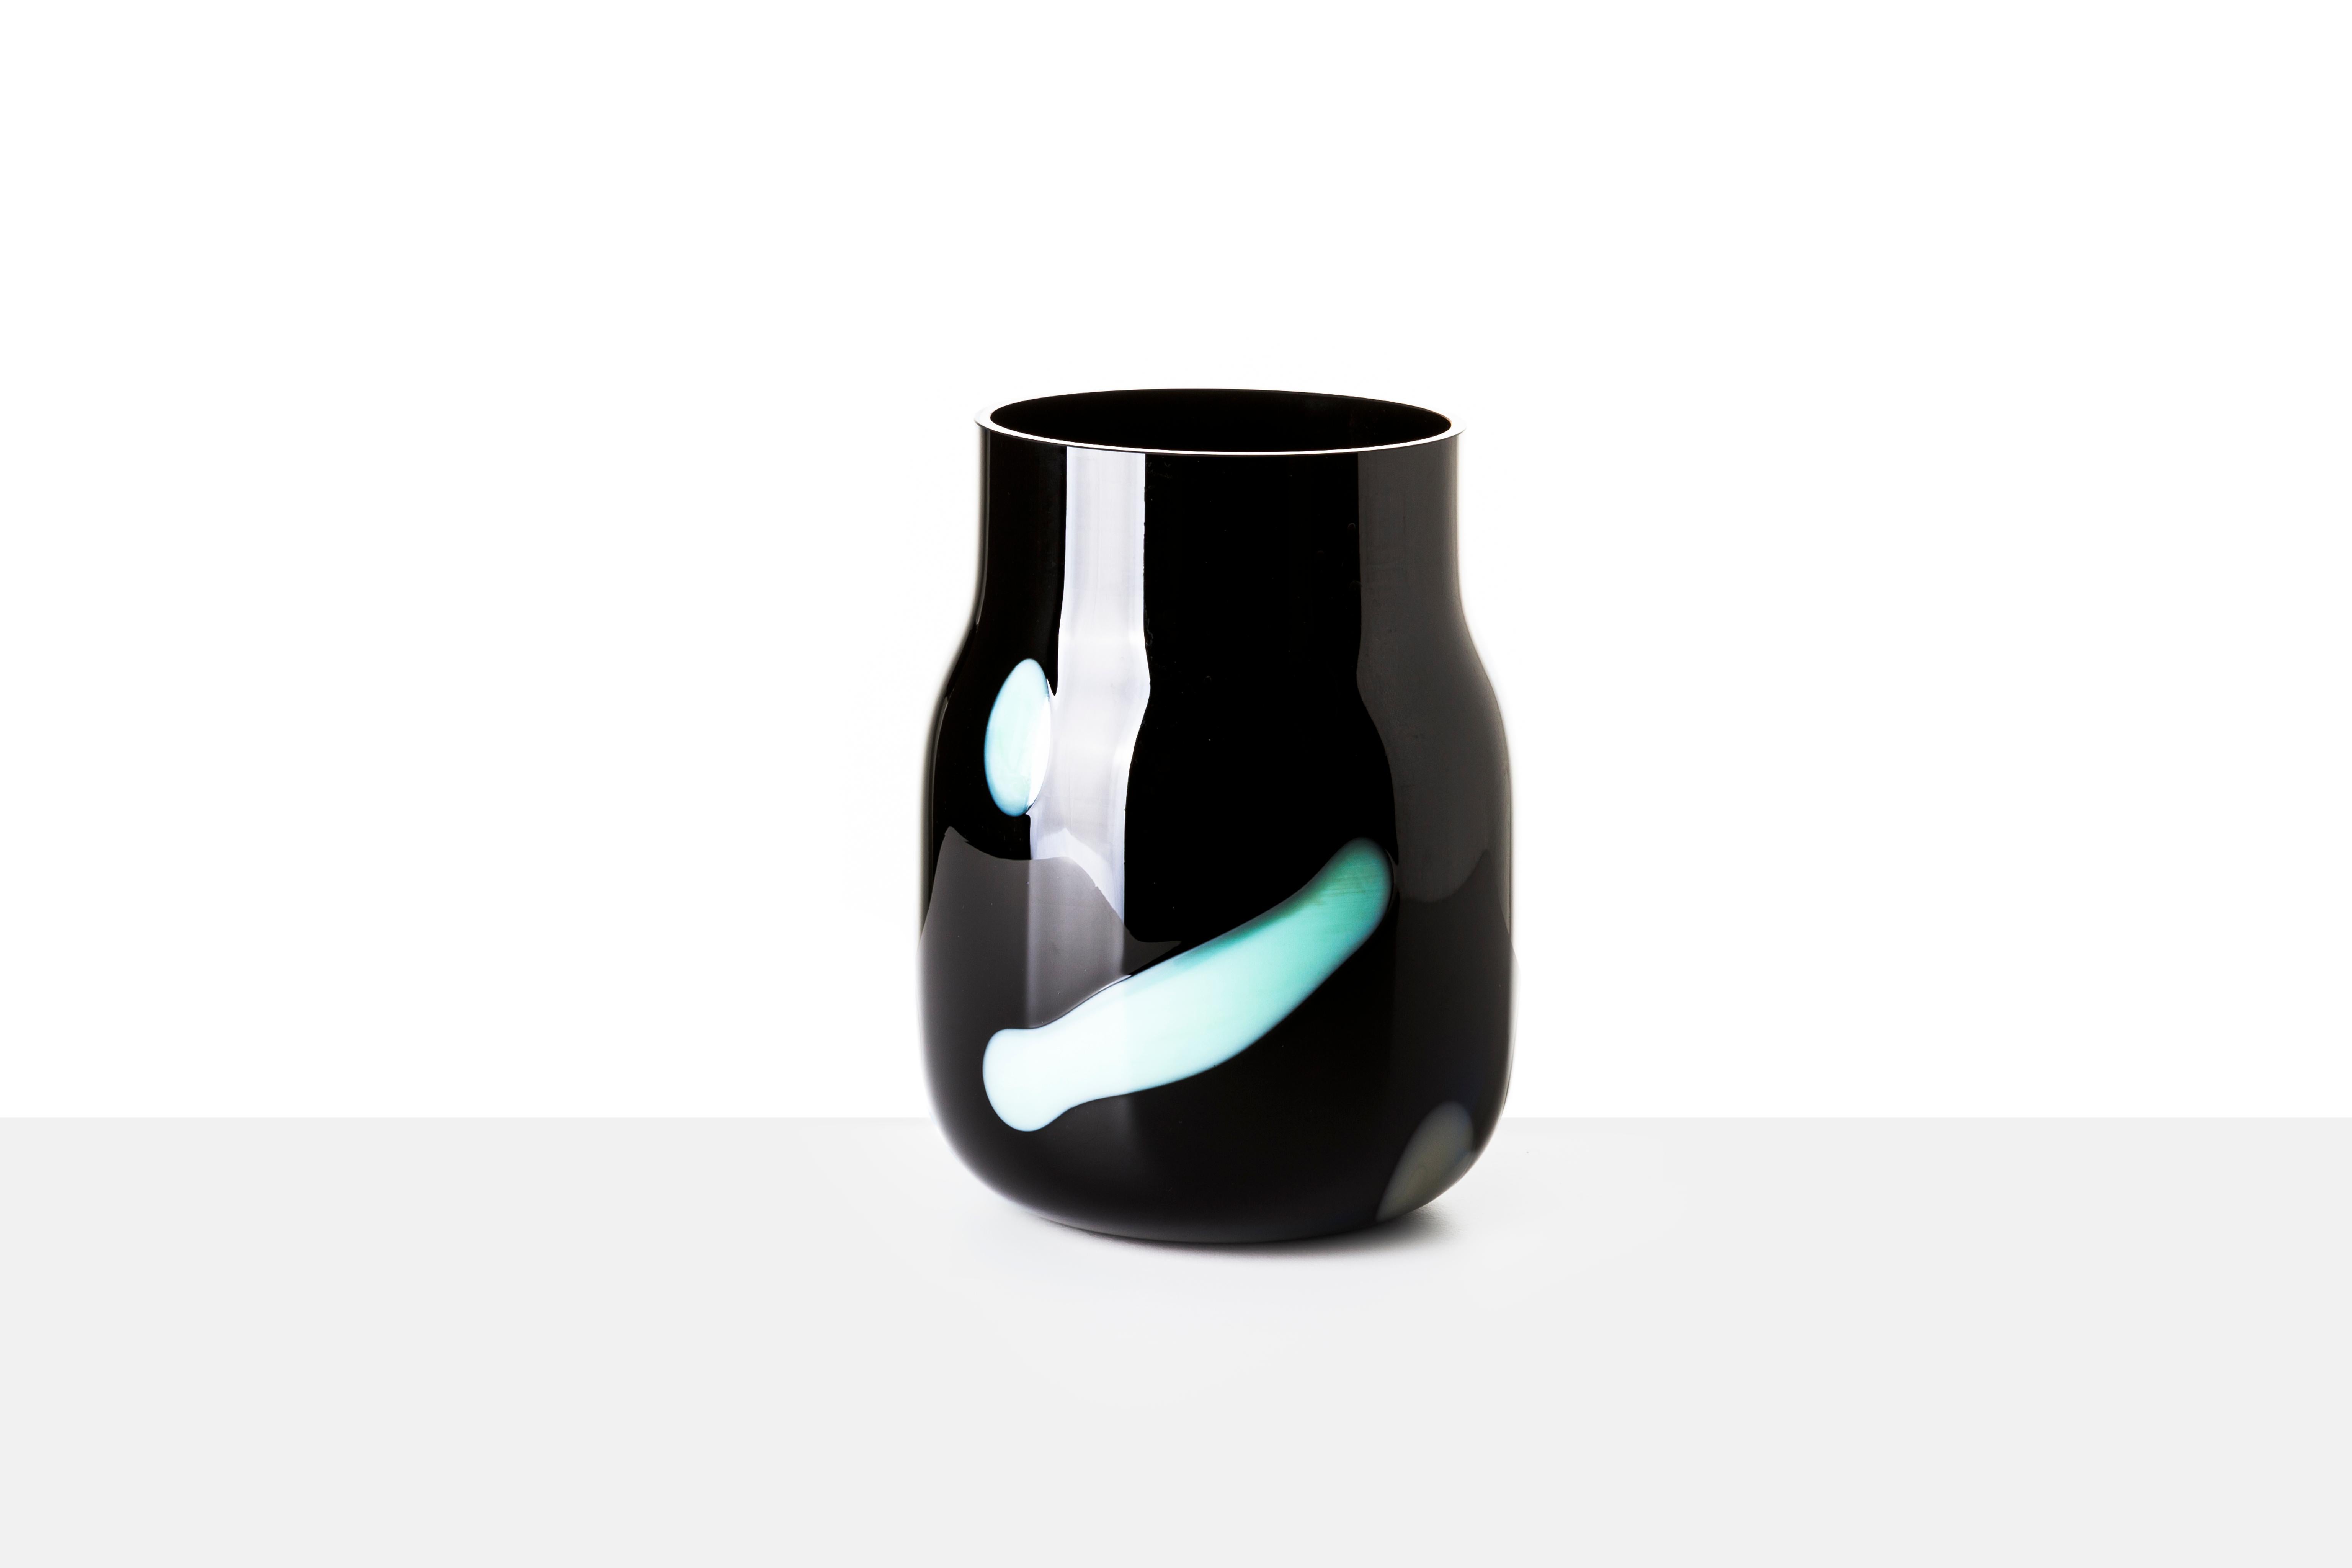 Big Bandaska Postmodern vase by Dechem Studio.
Dimensions: D 15 x H 25 cm.
Materials: glass.
Available in 2 sizes: D15 x H25, D22 x H33 cm.

Another version of the highly successful Bandaska vase pays tribute to the Italian Postmodern movement